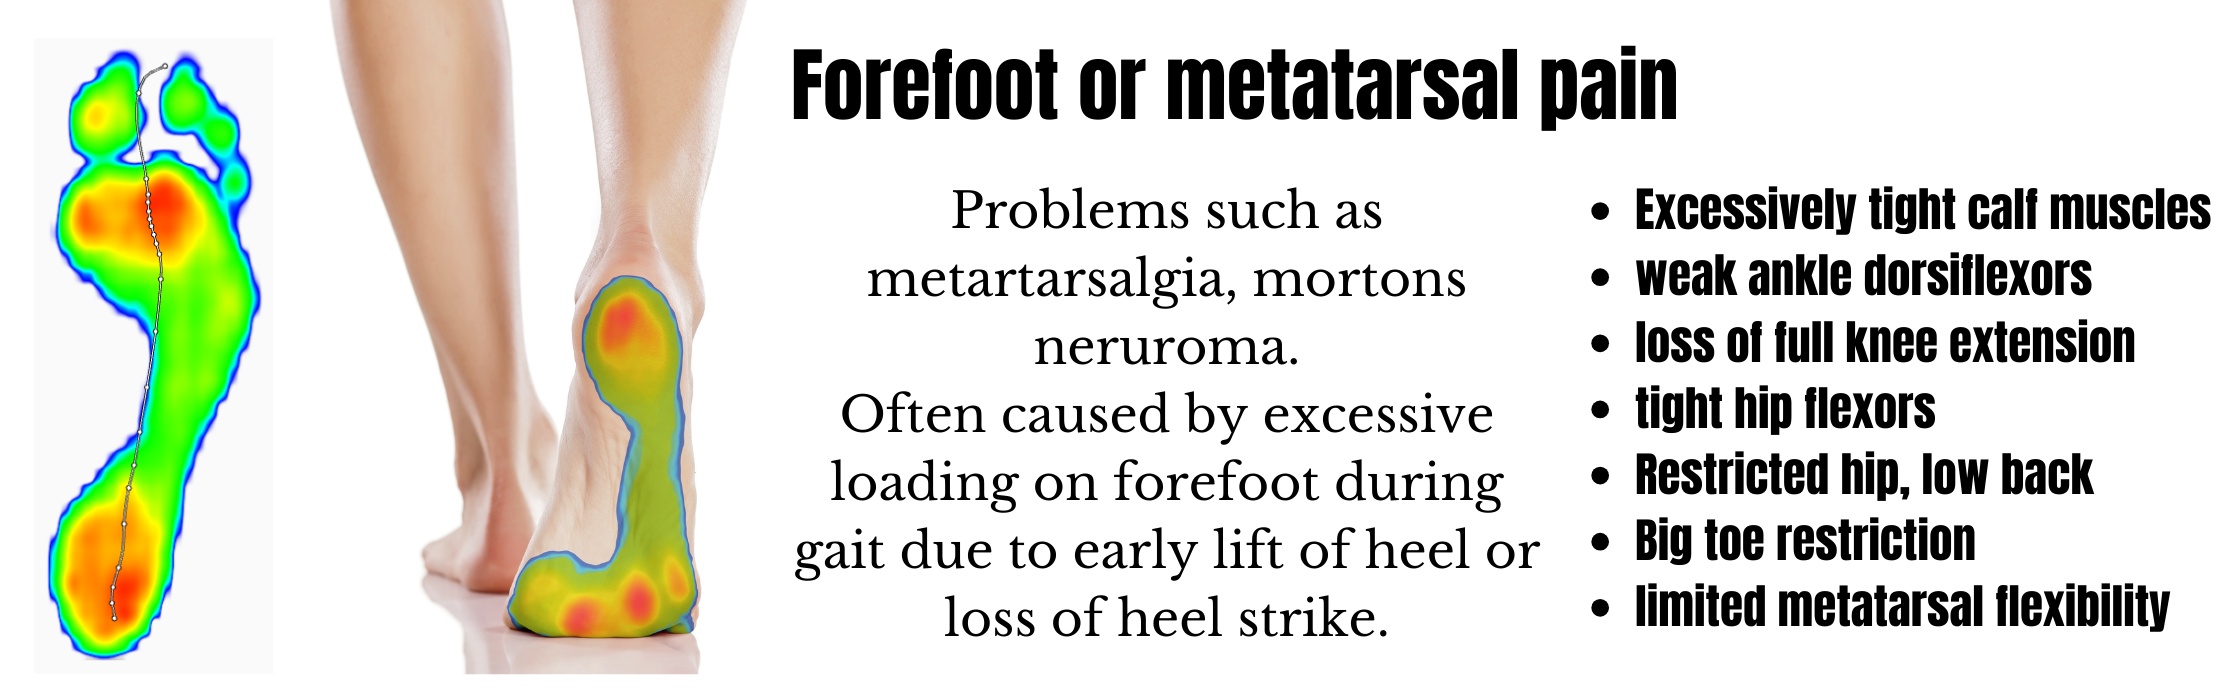 Forefoot or metatarsal pain